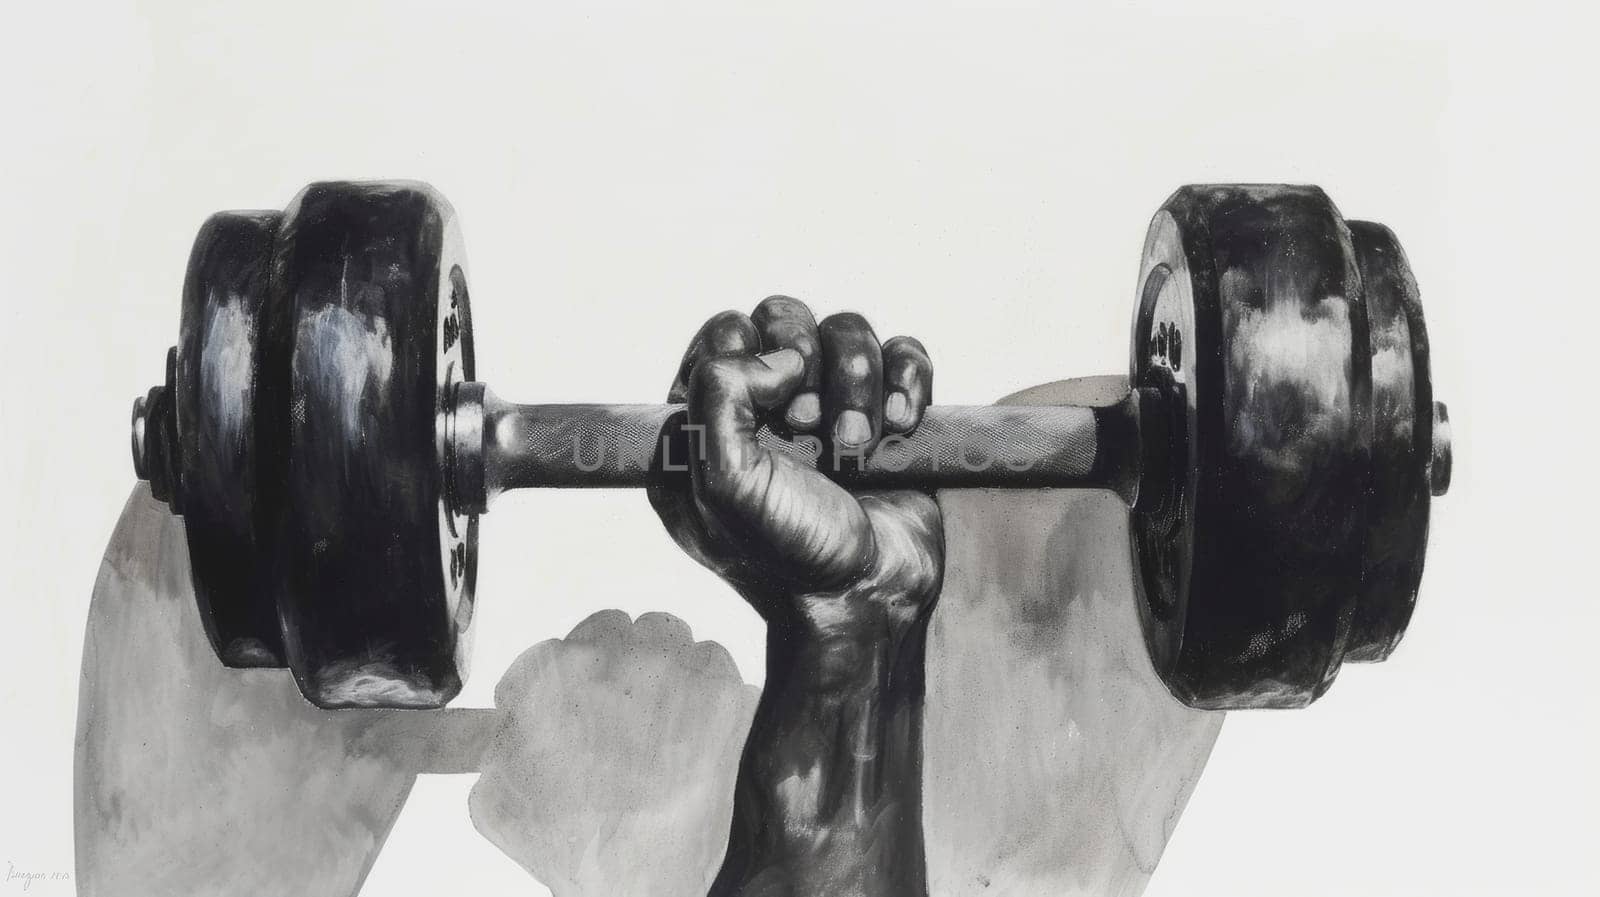 Man Lifting Dumbbell With Shadow by Anastasiia